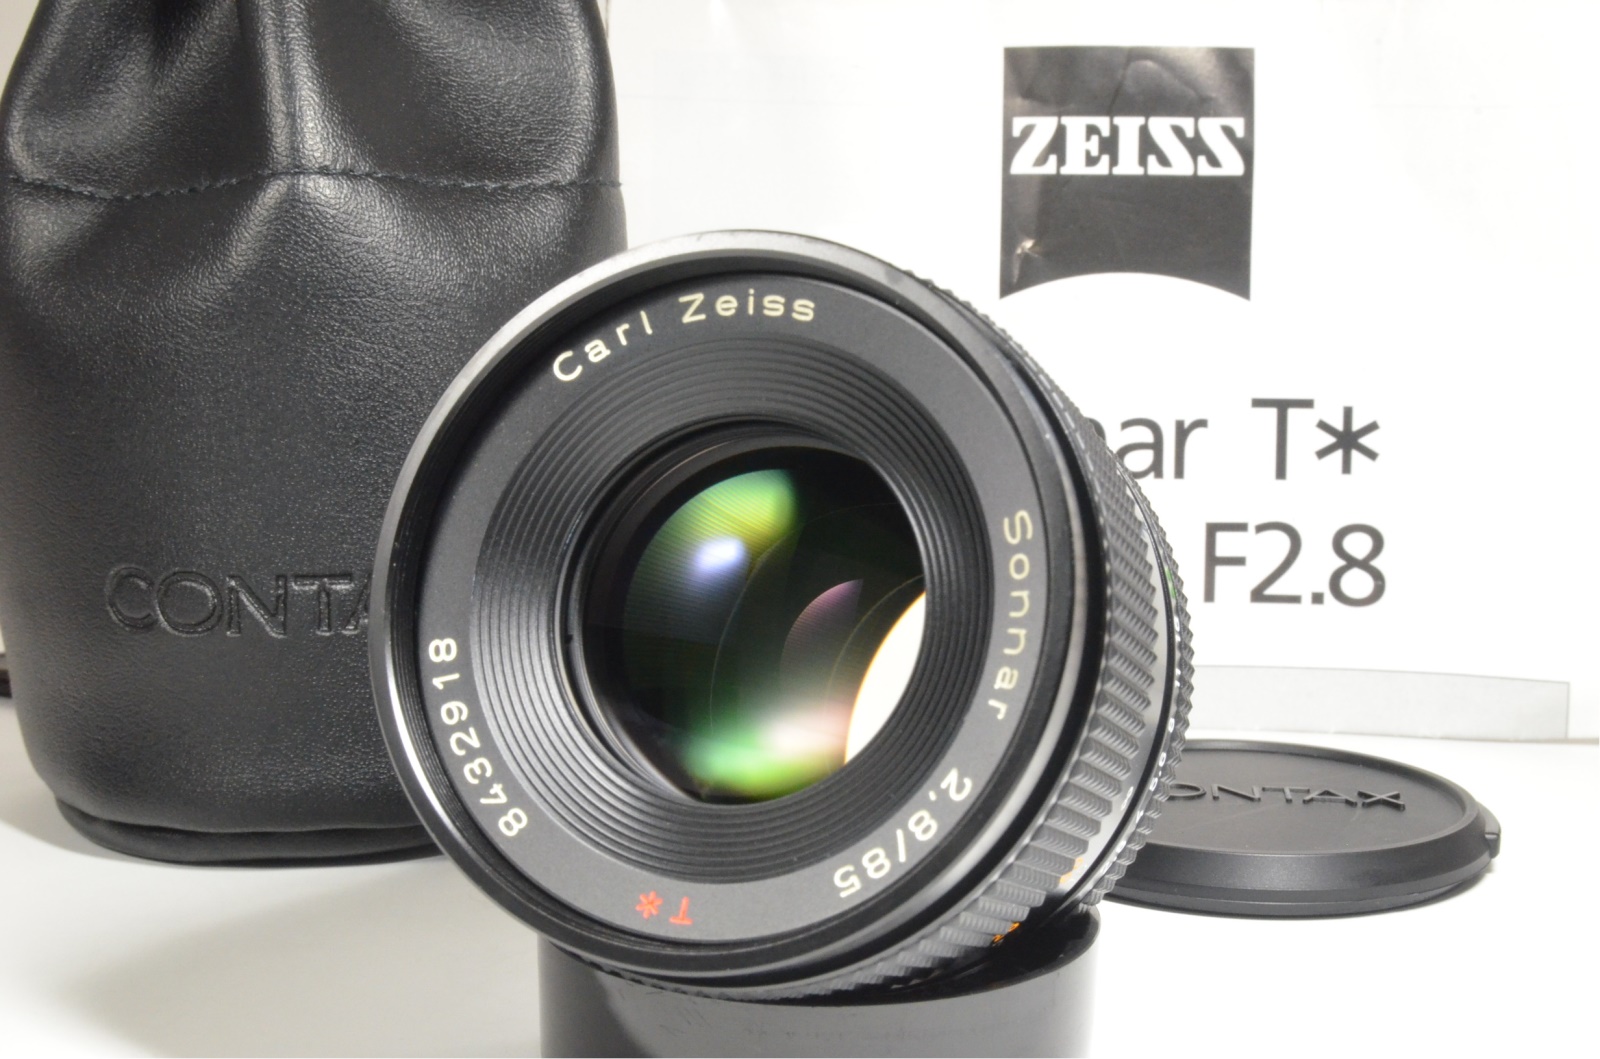 CONTAX Carl Zeiss Sonnar T* 85mm f2.8 MMG Germany #a1201 – SuperB 